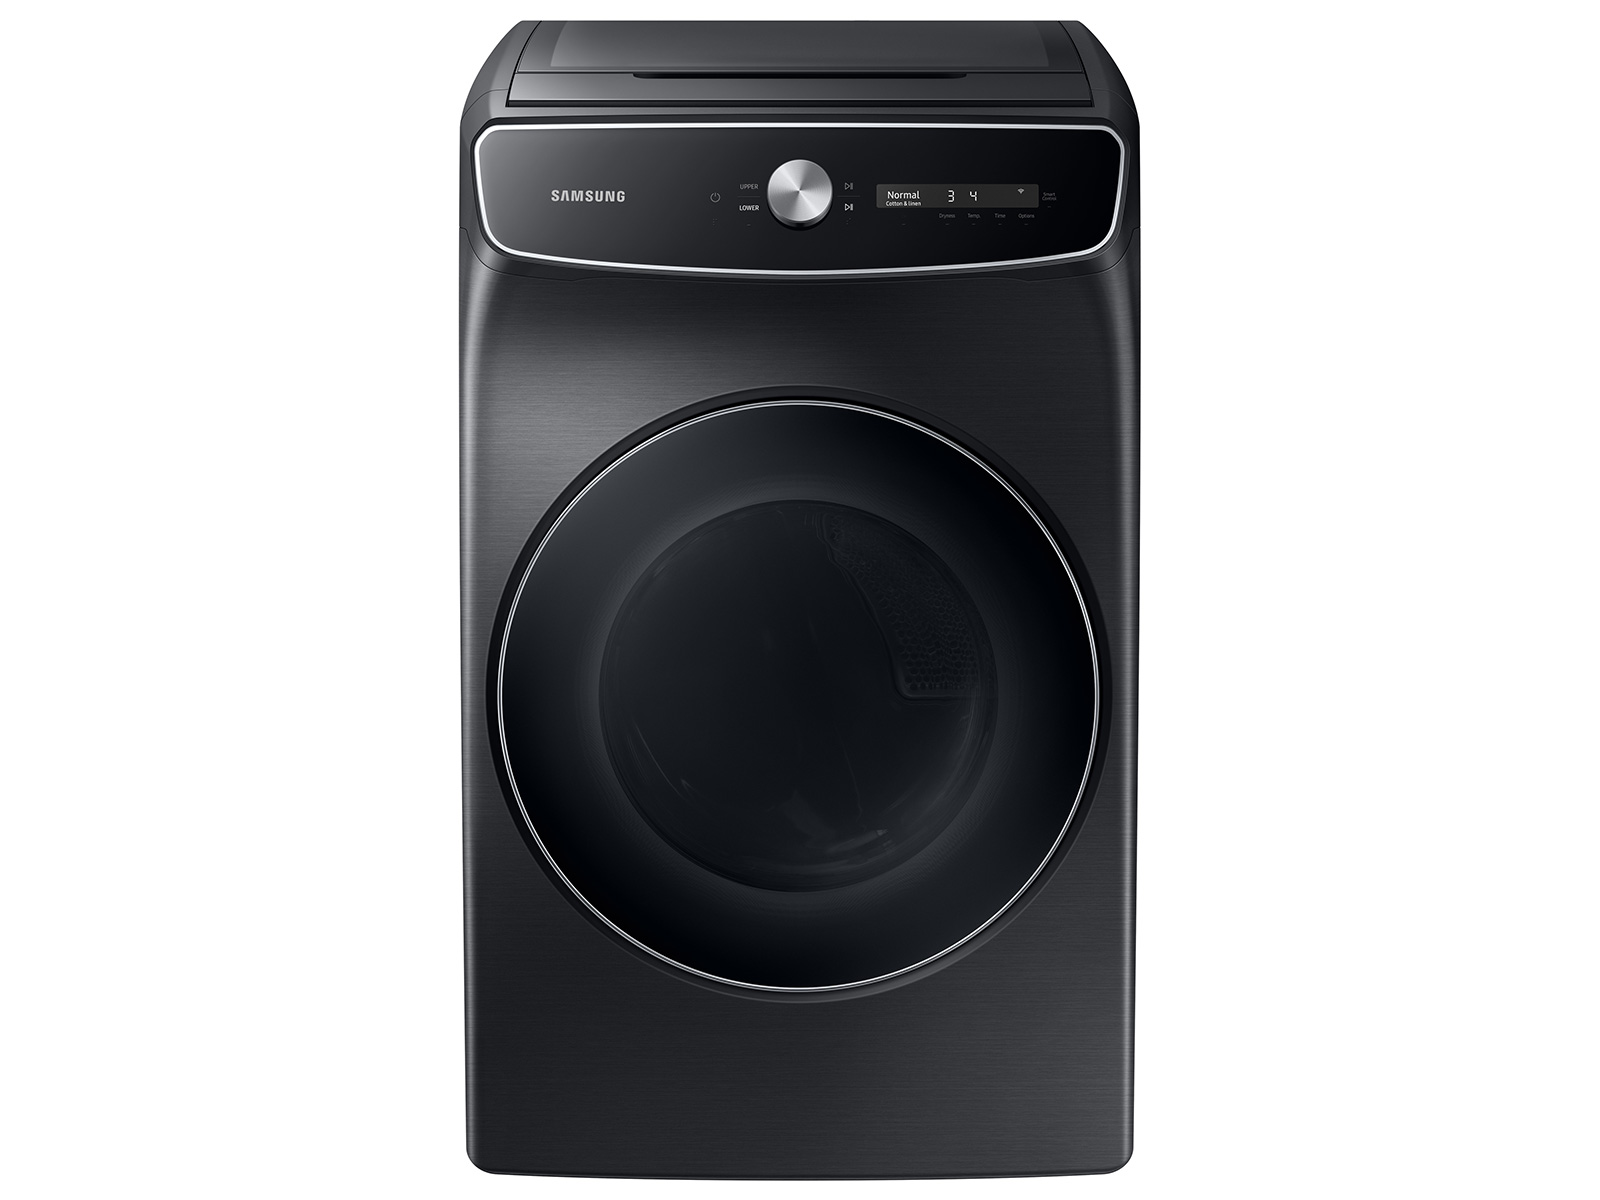 Photos - Tumble Dryer Samsung 7.5 cu. ft. Smart Dial Gas Dryer with FlexDry™ and Super Speed Dry 